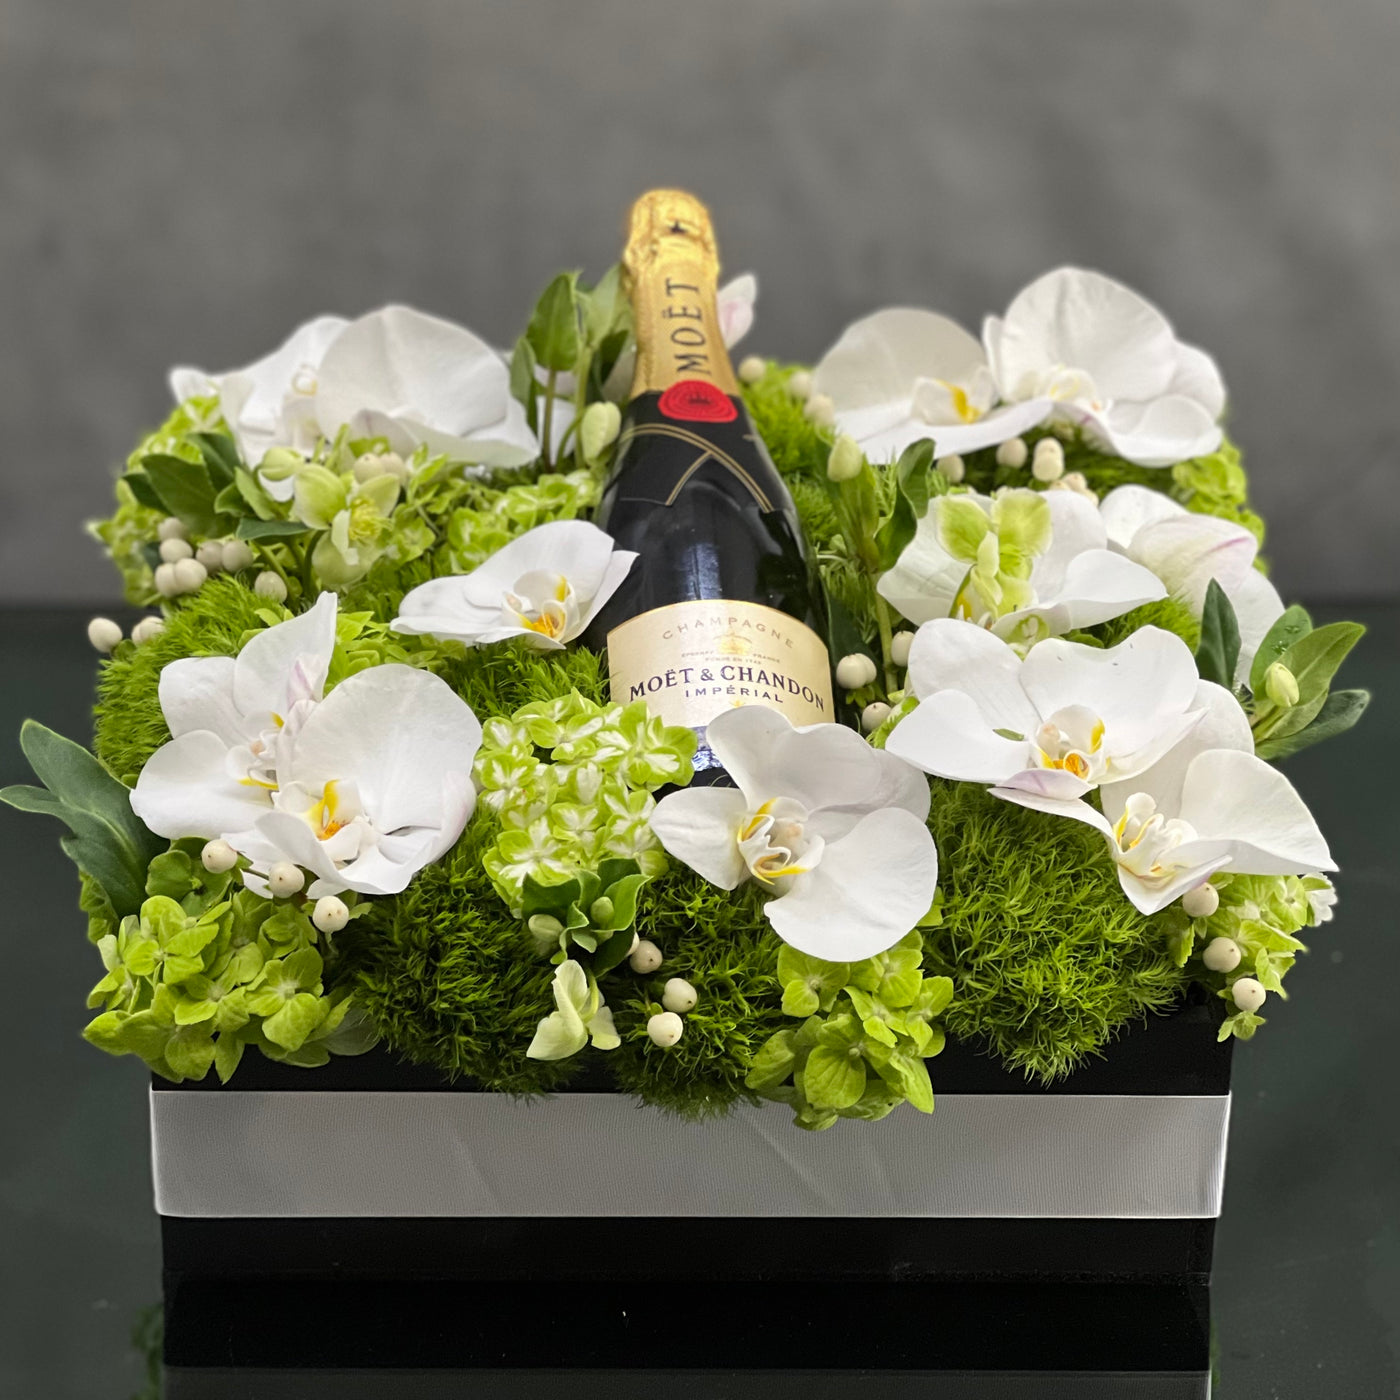 Beverly Hills Florist presents this luxury Moet floral box with orchids and other locally sourced flowers. 24 inch square box. for same day delivery !